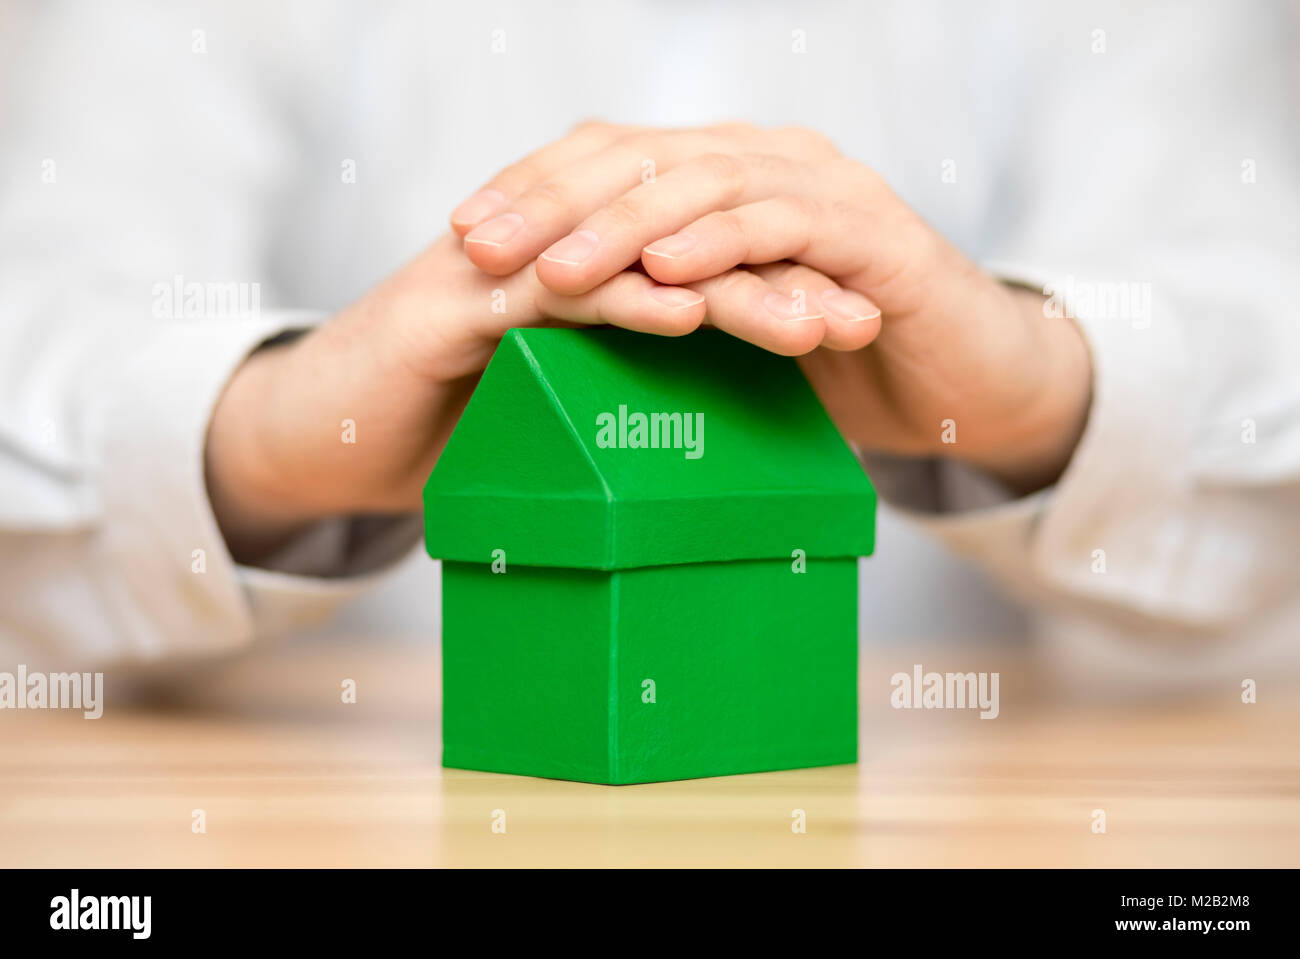 Small green house protected by hands Stock Photo